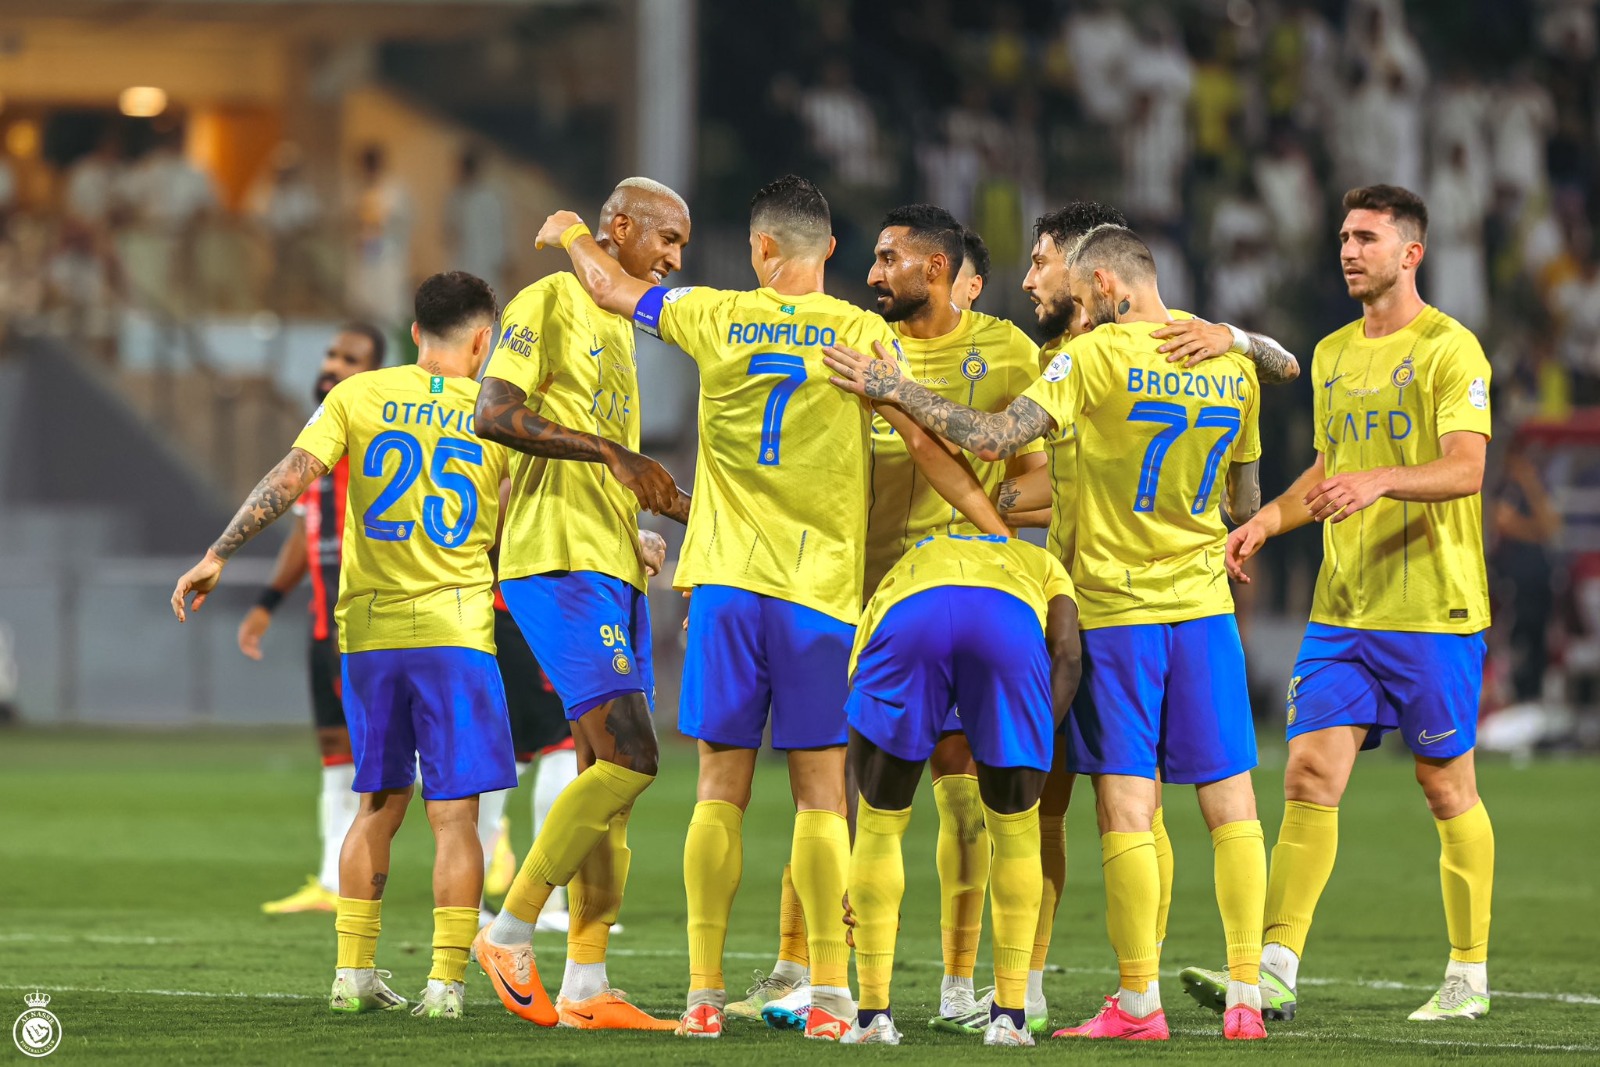 Persepolis FC vs Al Nassr Live Streaming will be on Fancode, AFC Champions league 2023 LIVE telecast on Sports18